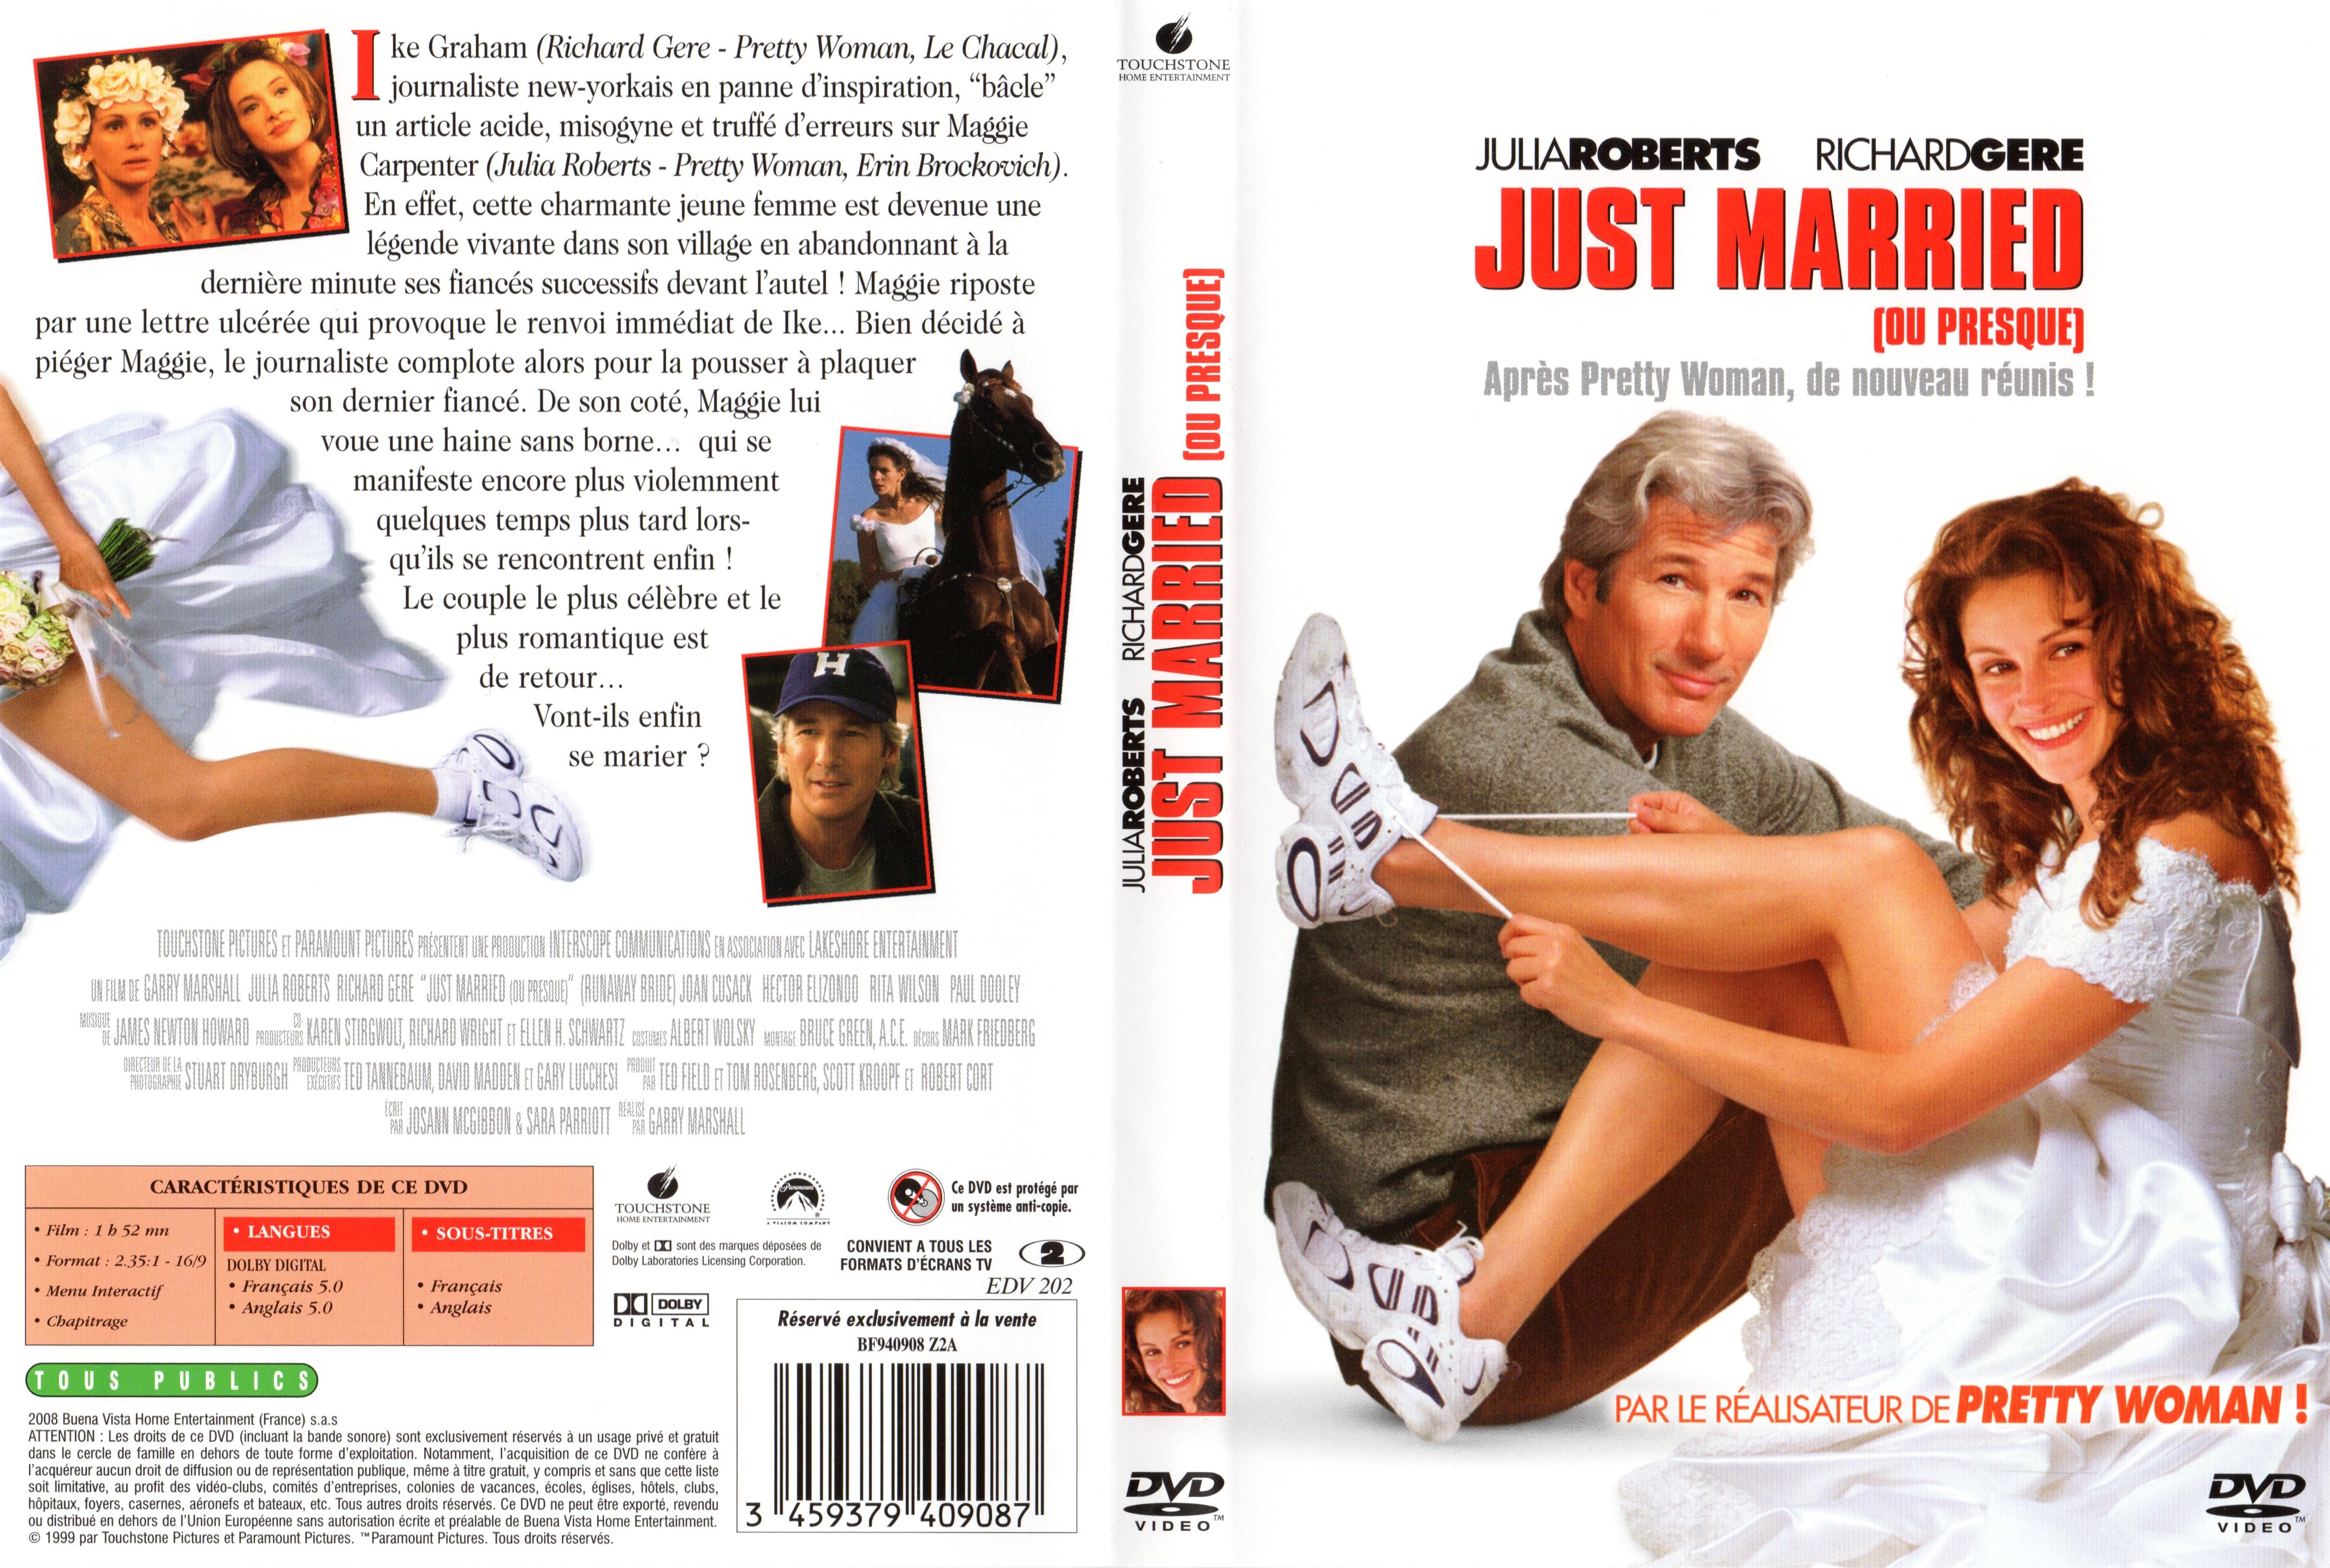 Jaquette DVD Just married v3